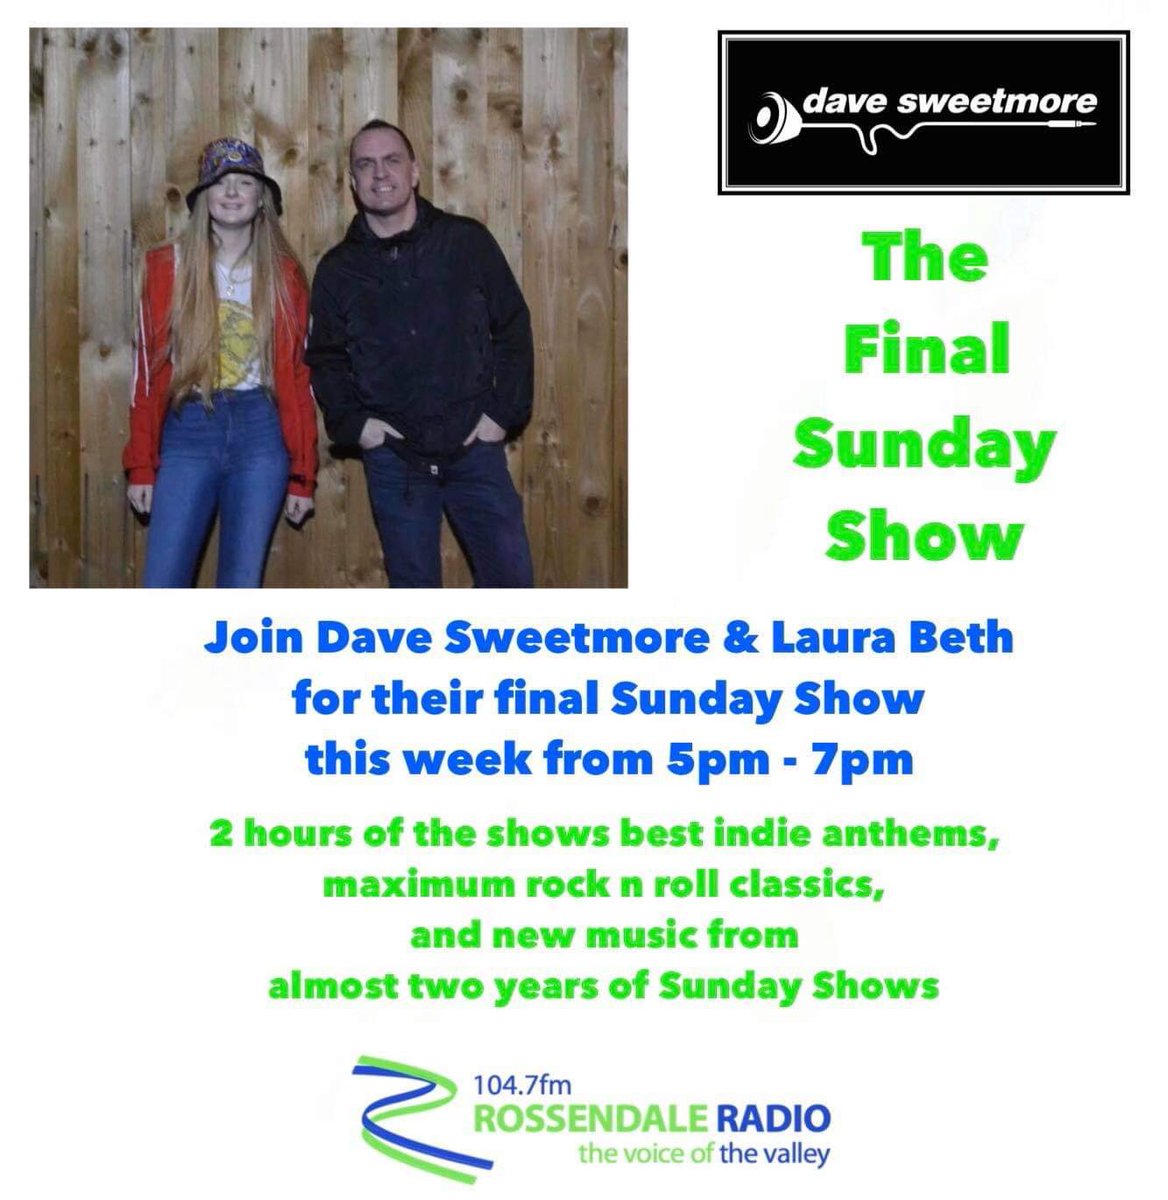 Today from 5pm, the final @davesweetmore Sunday show, with Dave and @LauraBethReal ↘️